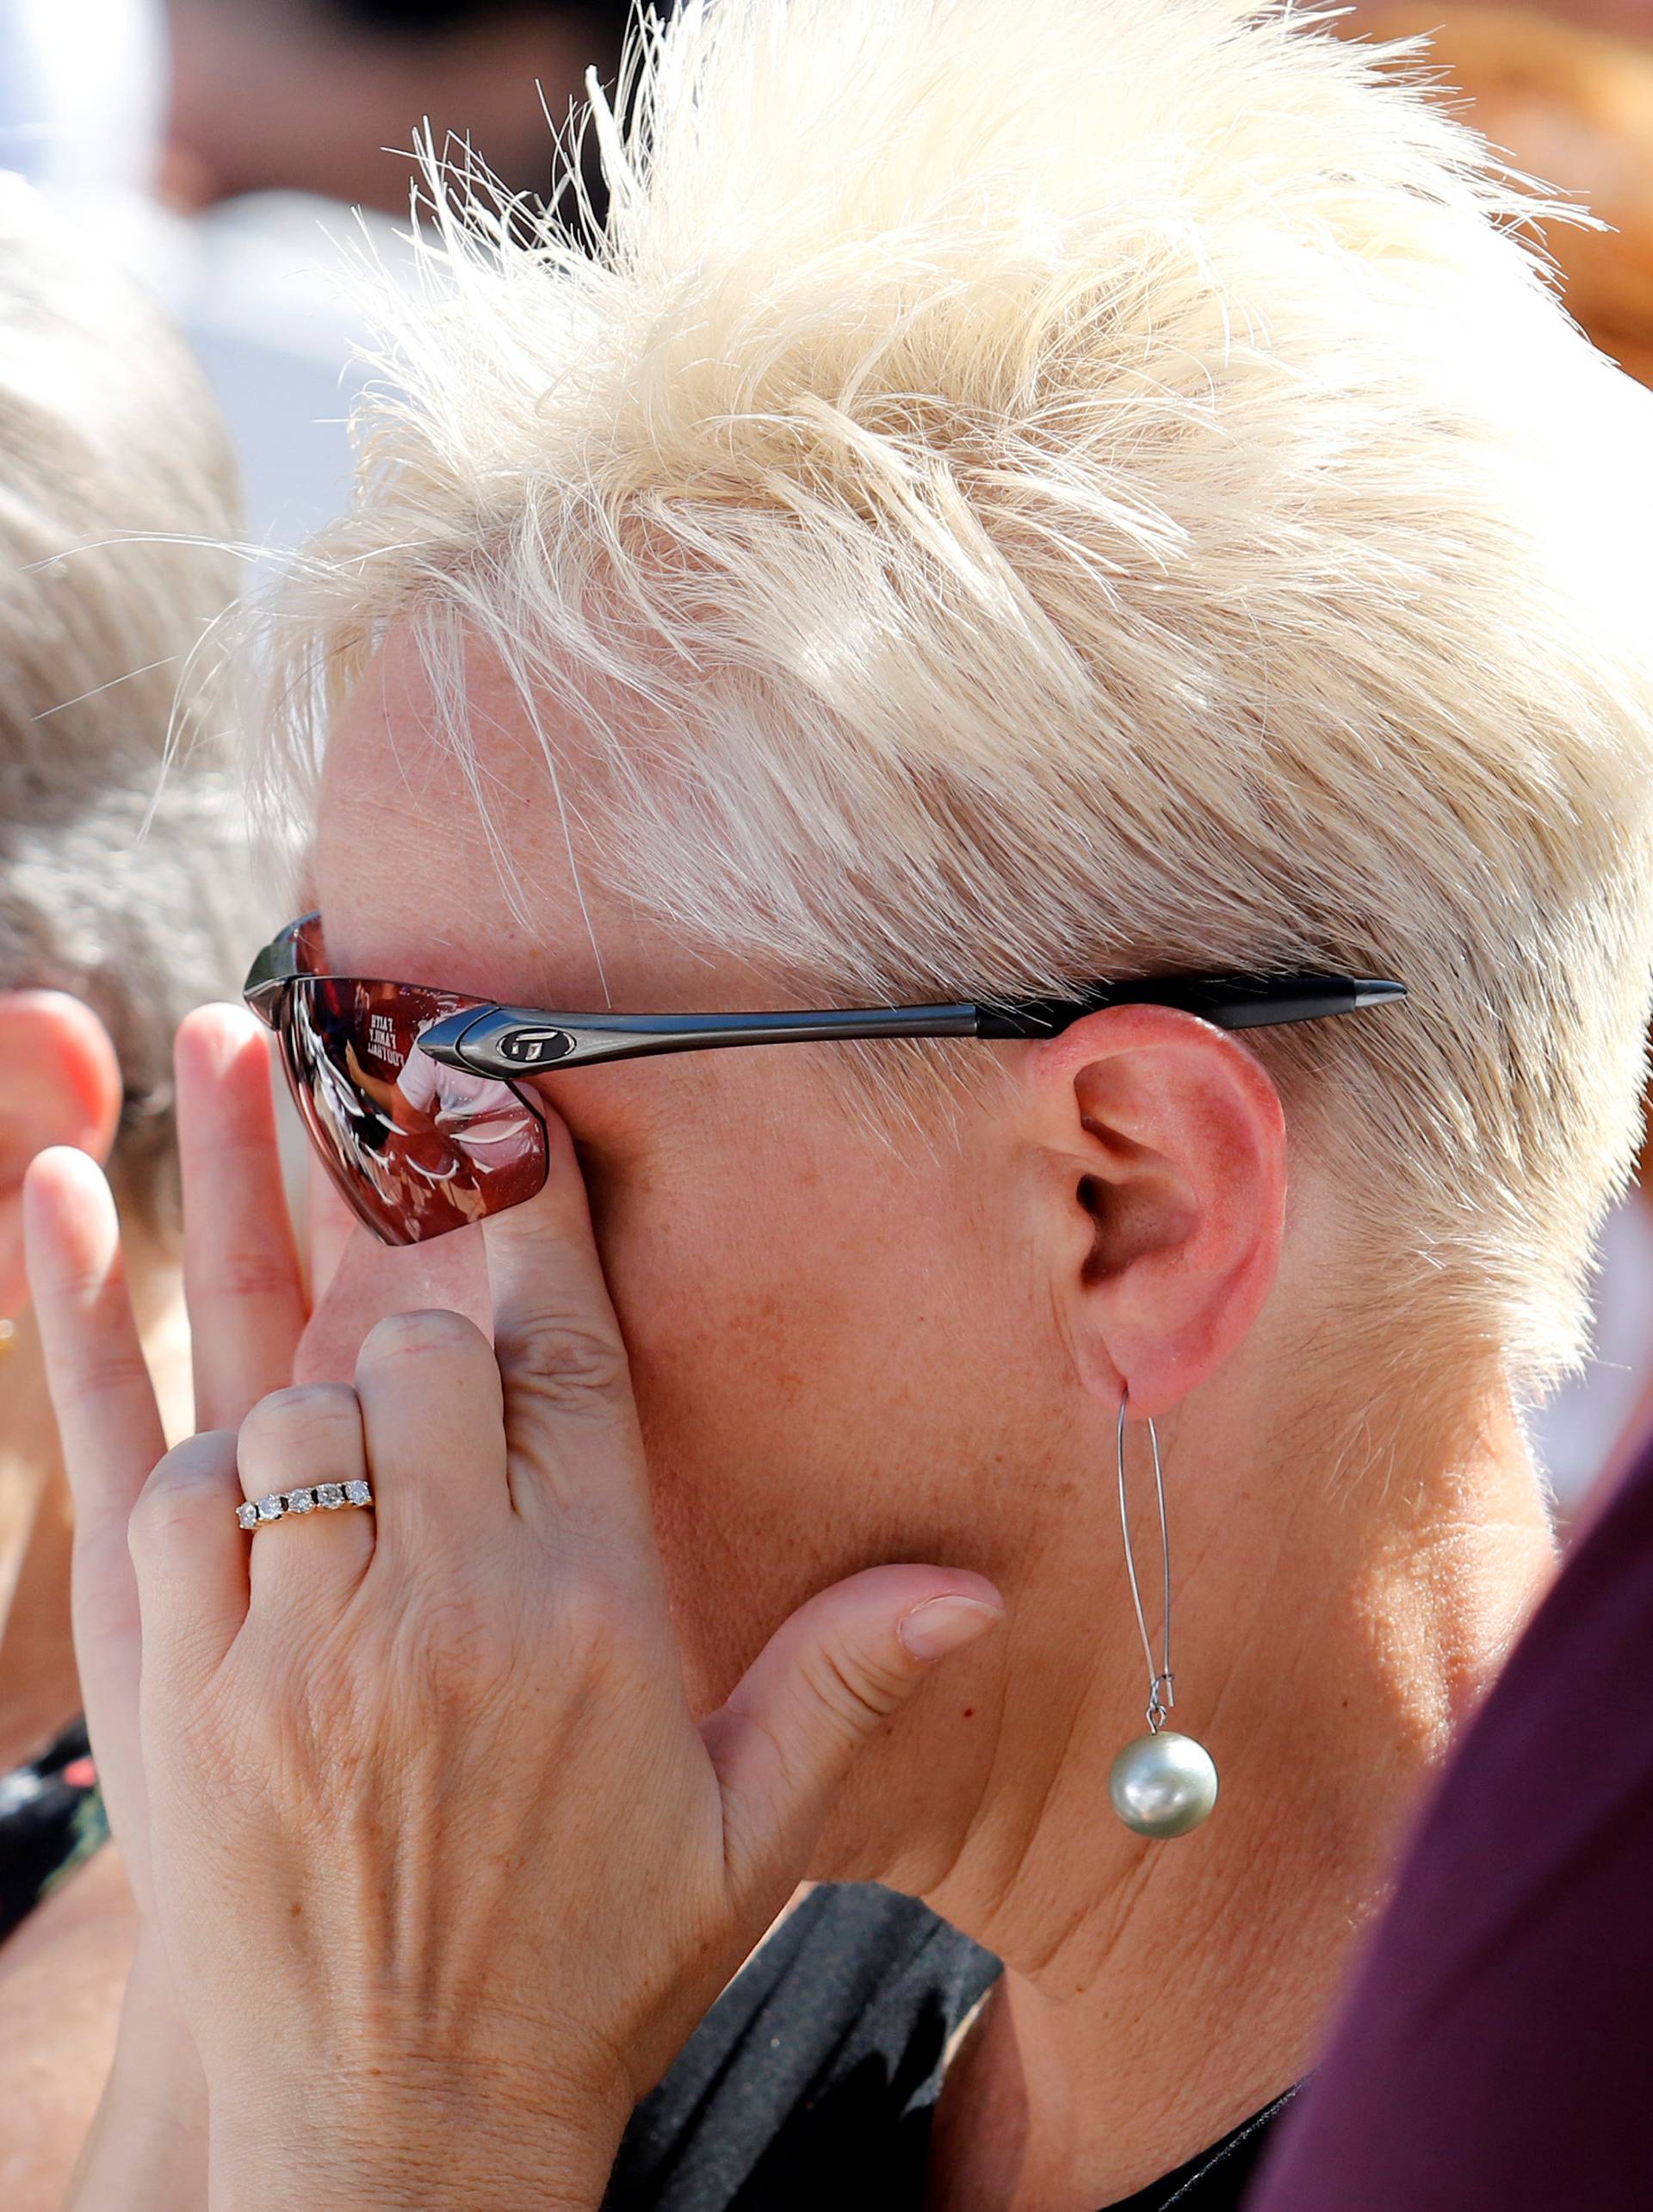 Mourners  attend a memorial for the Marjory Stoneman Douglas High School victims  following a school shooting incident in Parkland